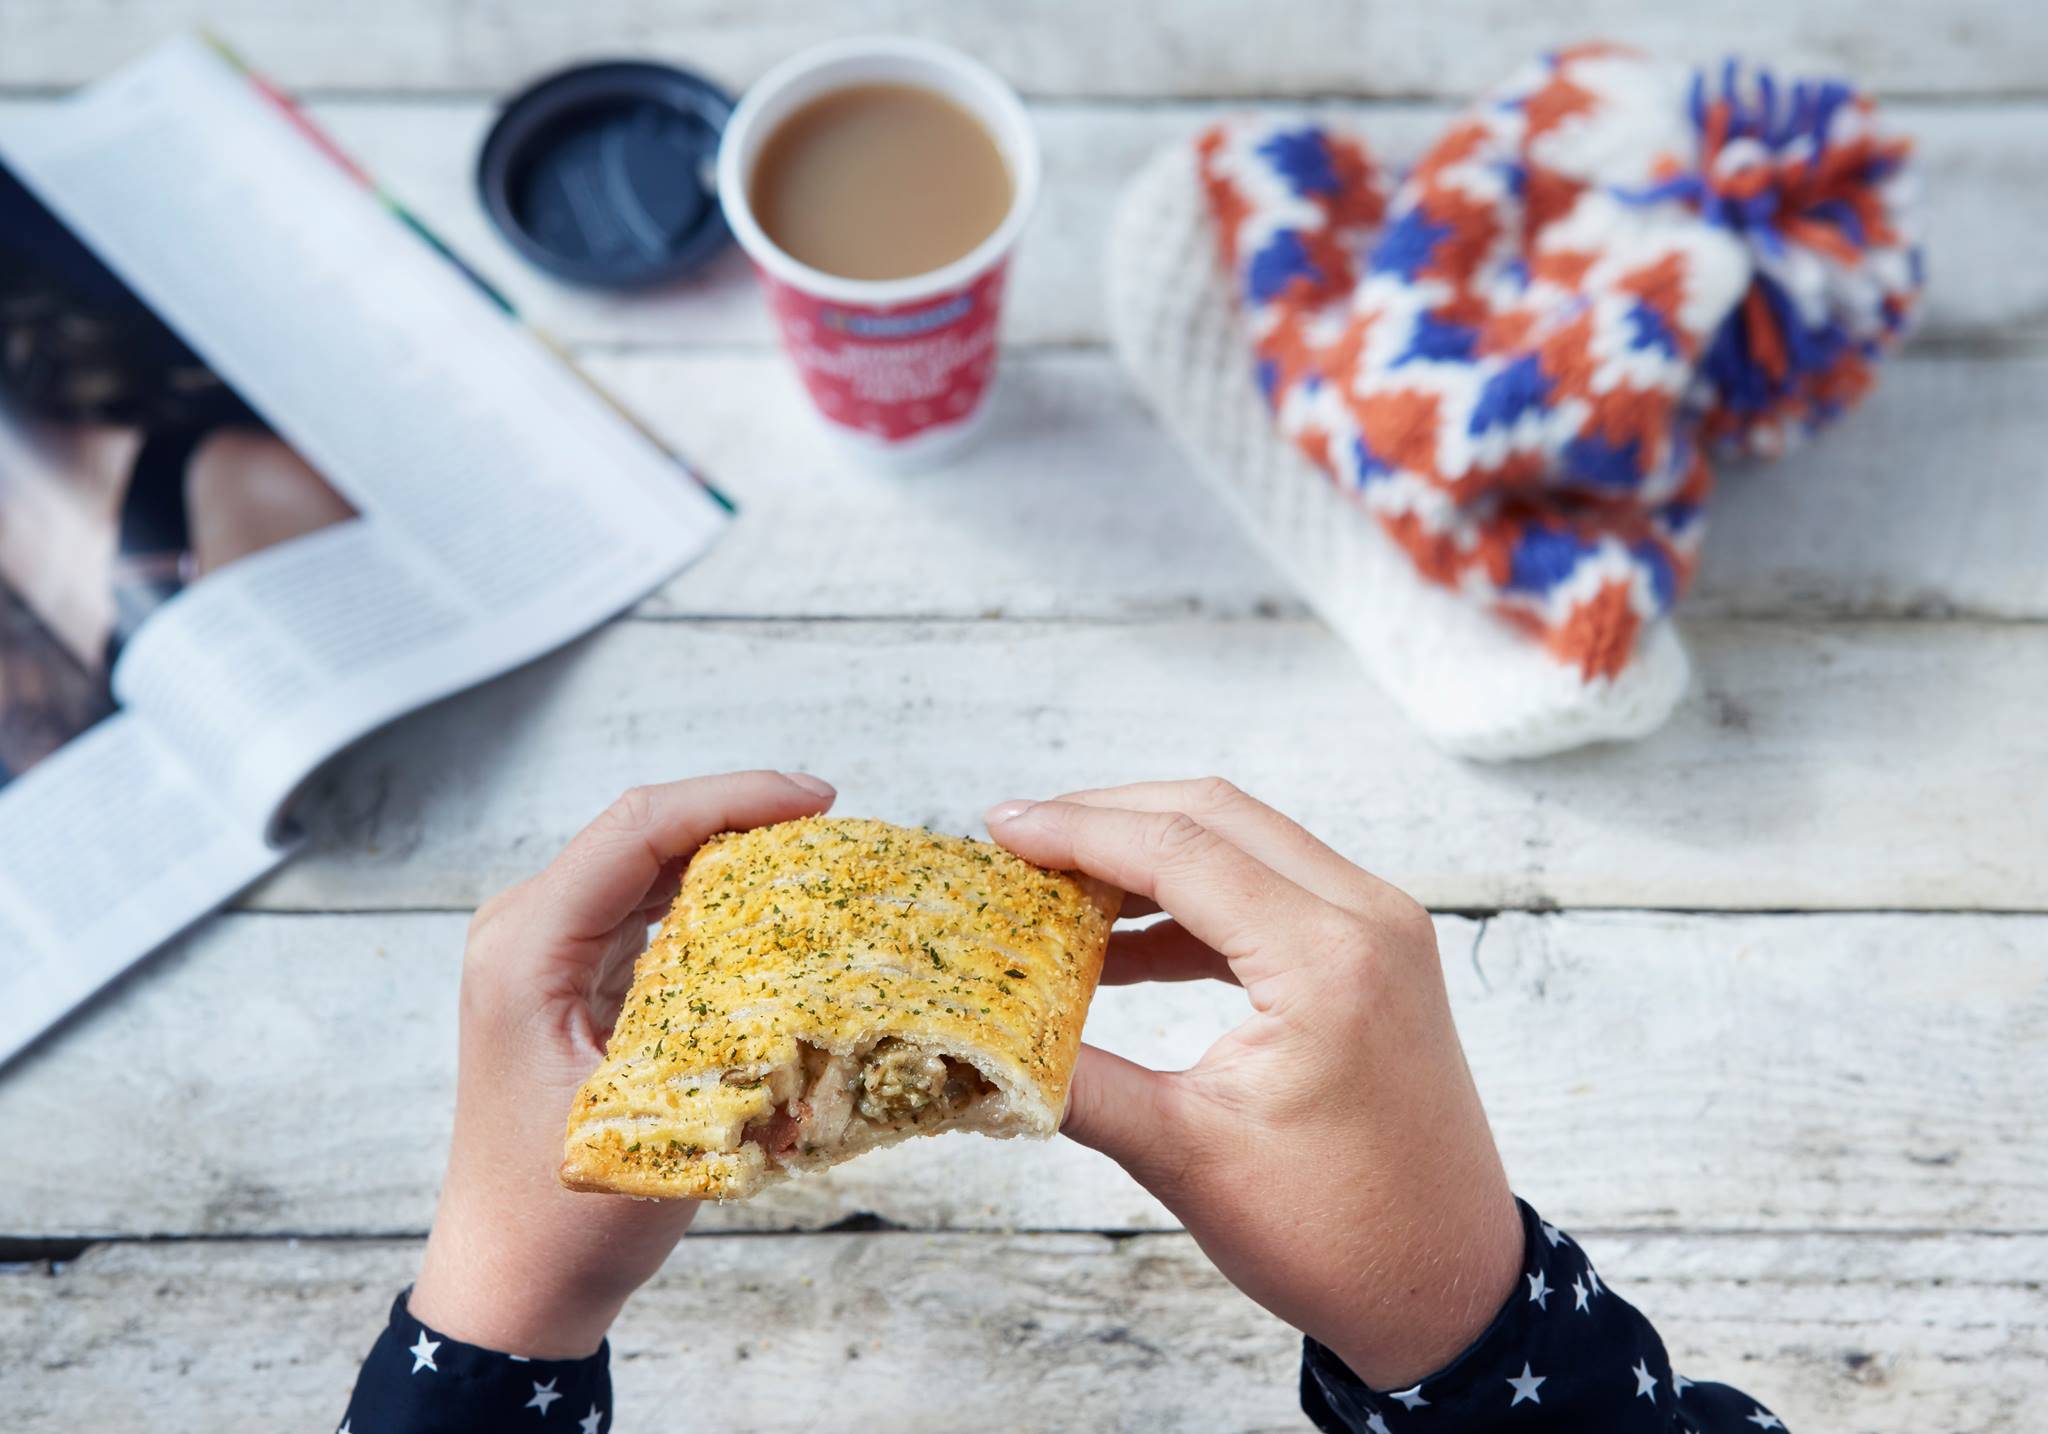 Greggs: bringing Britain together with comfort food